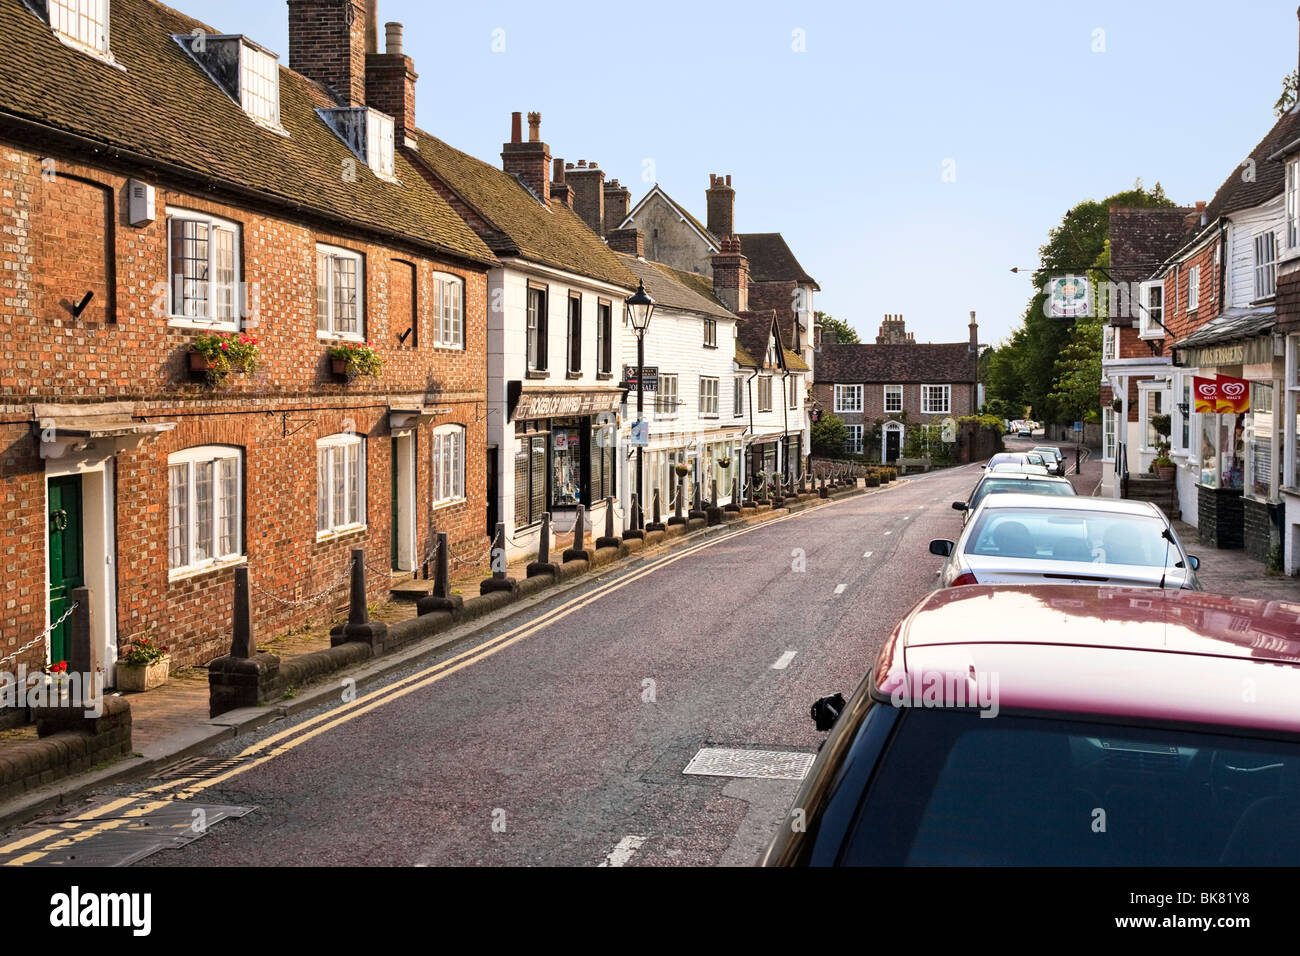 Mayfield High Street, East Sussex, England, UK Stockfoto